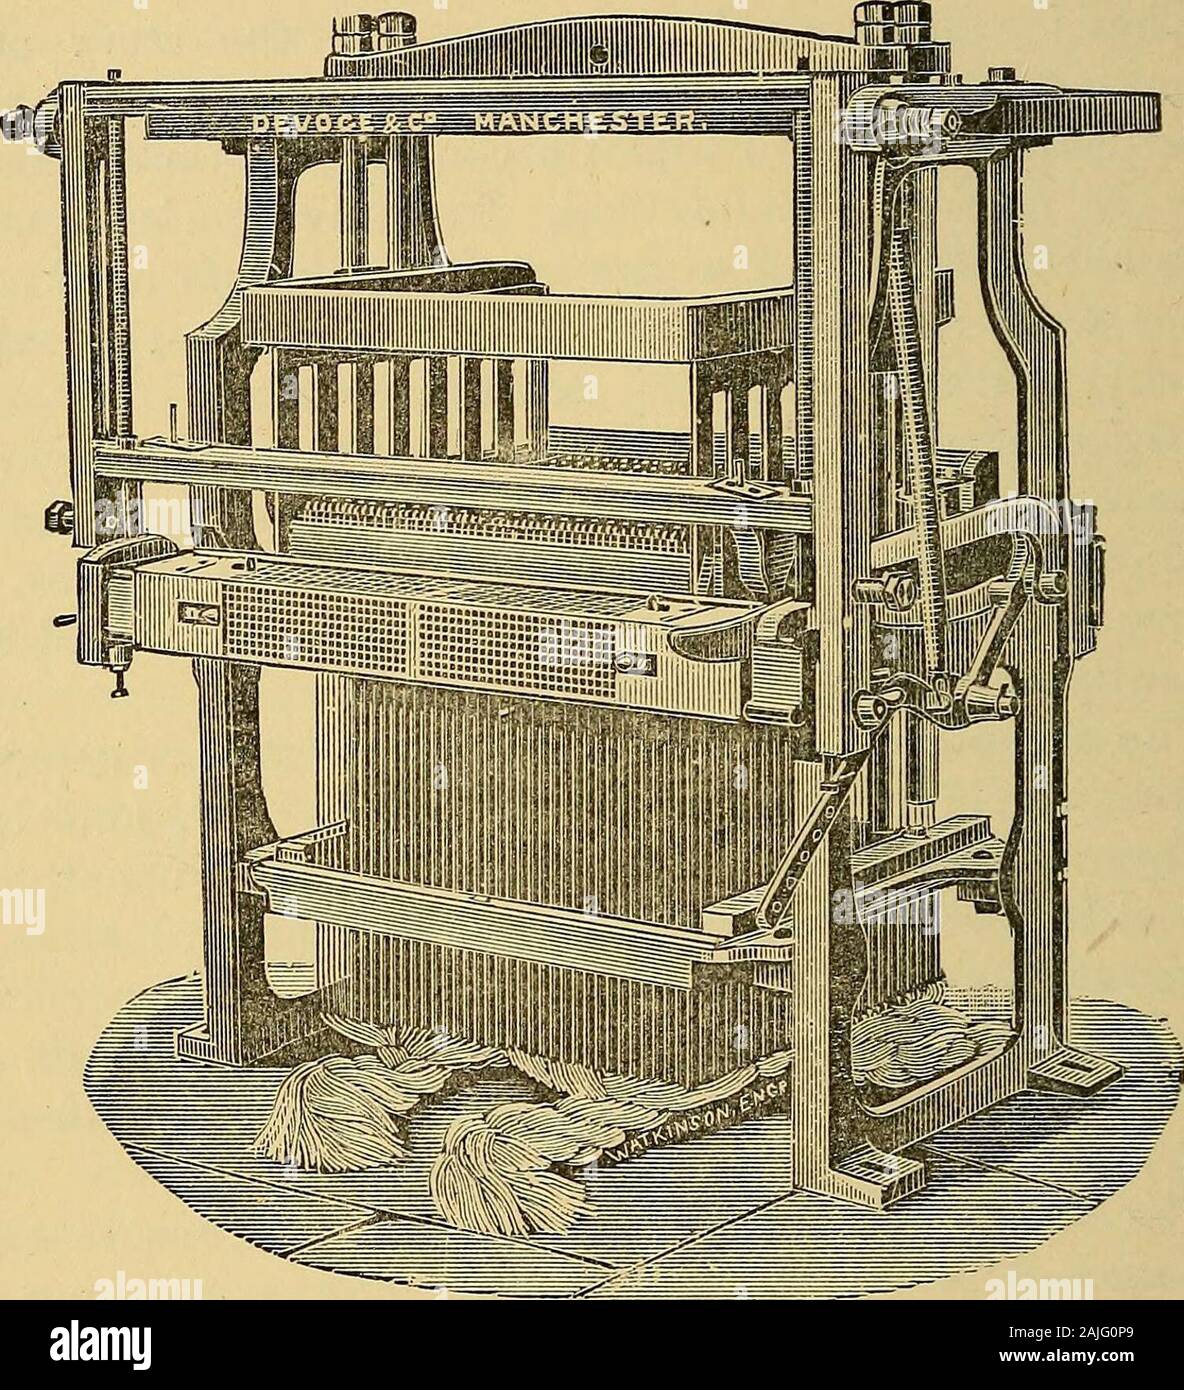 Cotton weaving: its development, principles, and practice . or type of the machine, its chiefparts are essentially the same, however modified foradaptation to particular requirements. The accompanying illustration, fig. 121, represents astandard make and type of jacquard, containing 400needles and one cylinder, and arranged for what is termedthe double lift: that is, it is a 400 needle machine, butinstead of having only 400 hooks it has 800 or two toeach needle, and also two griffes instead of one. Thismachine is extensively used in weaving cotton goods andall fabrics in which high speed is de Stock Photo